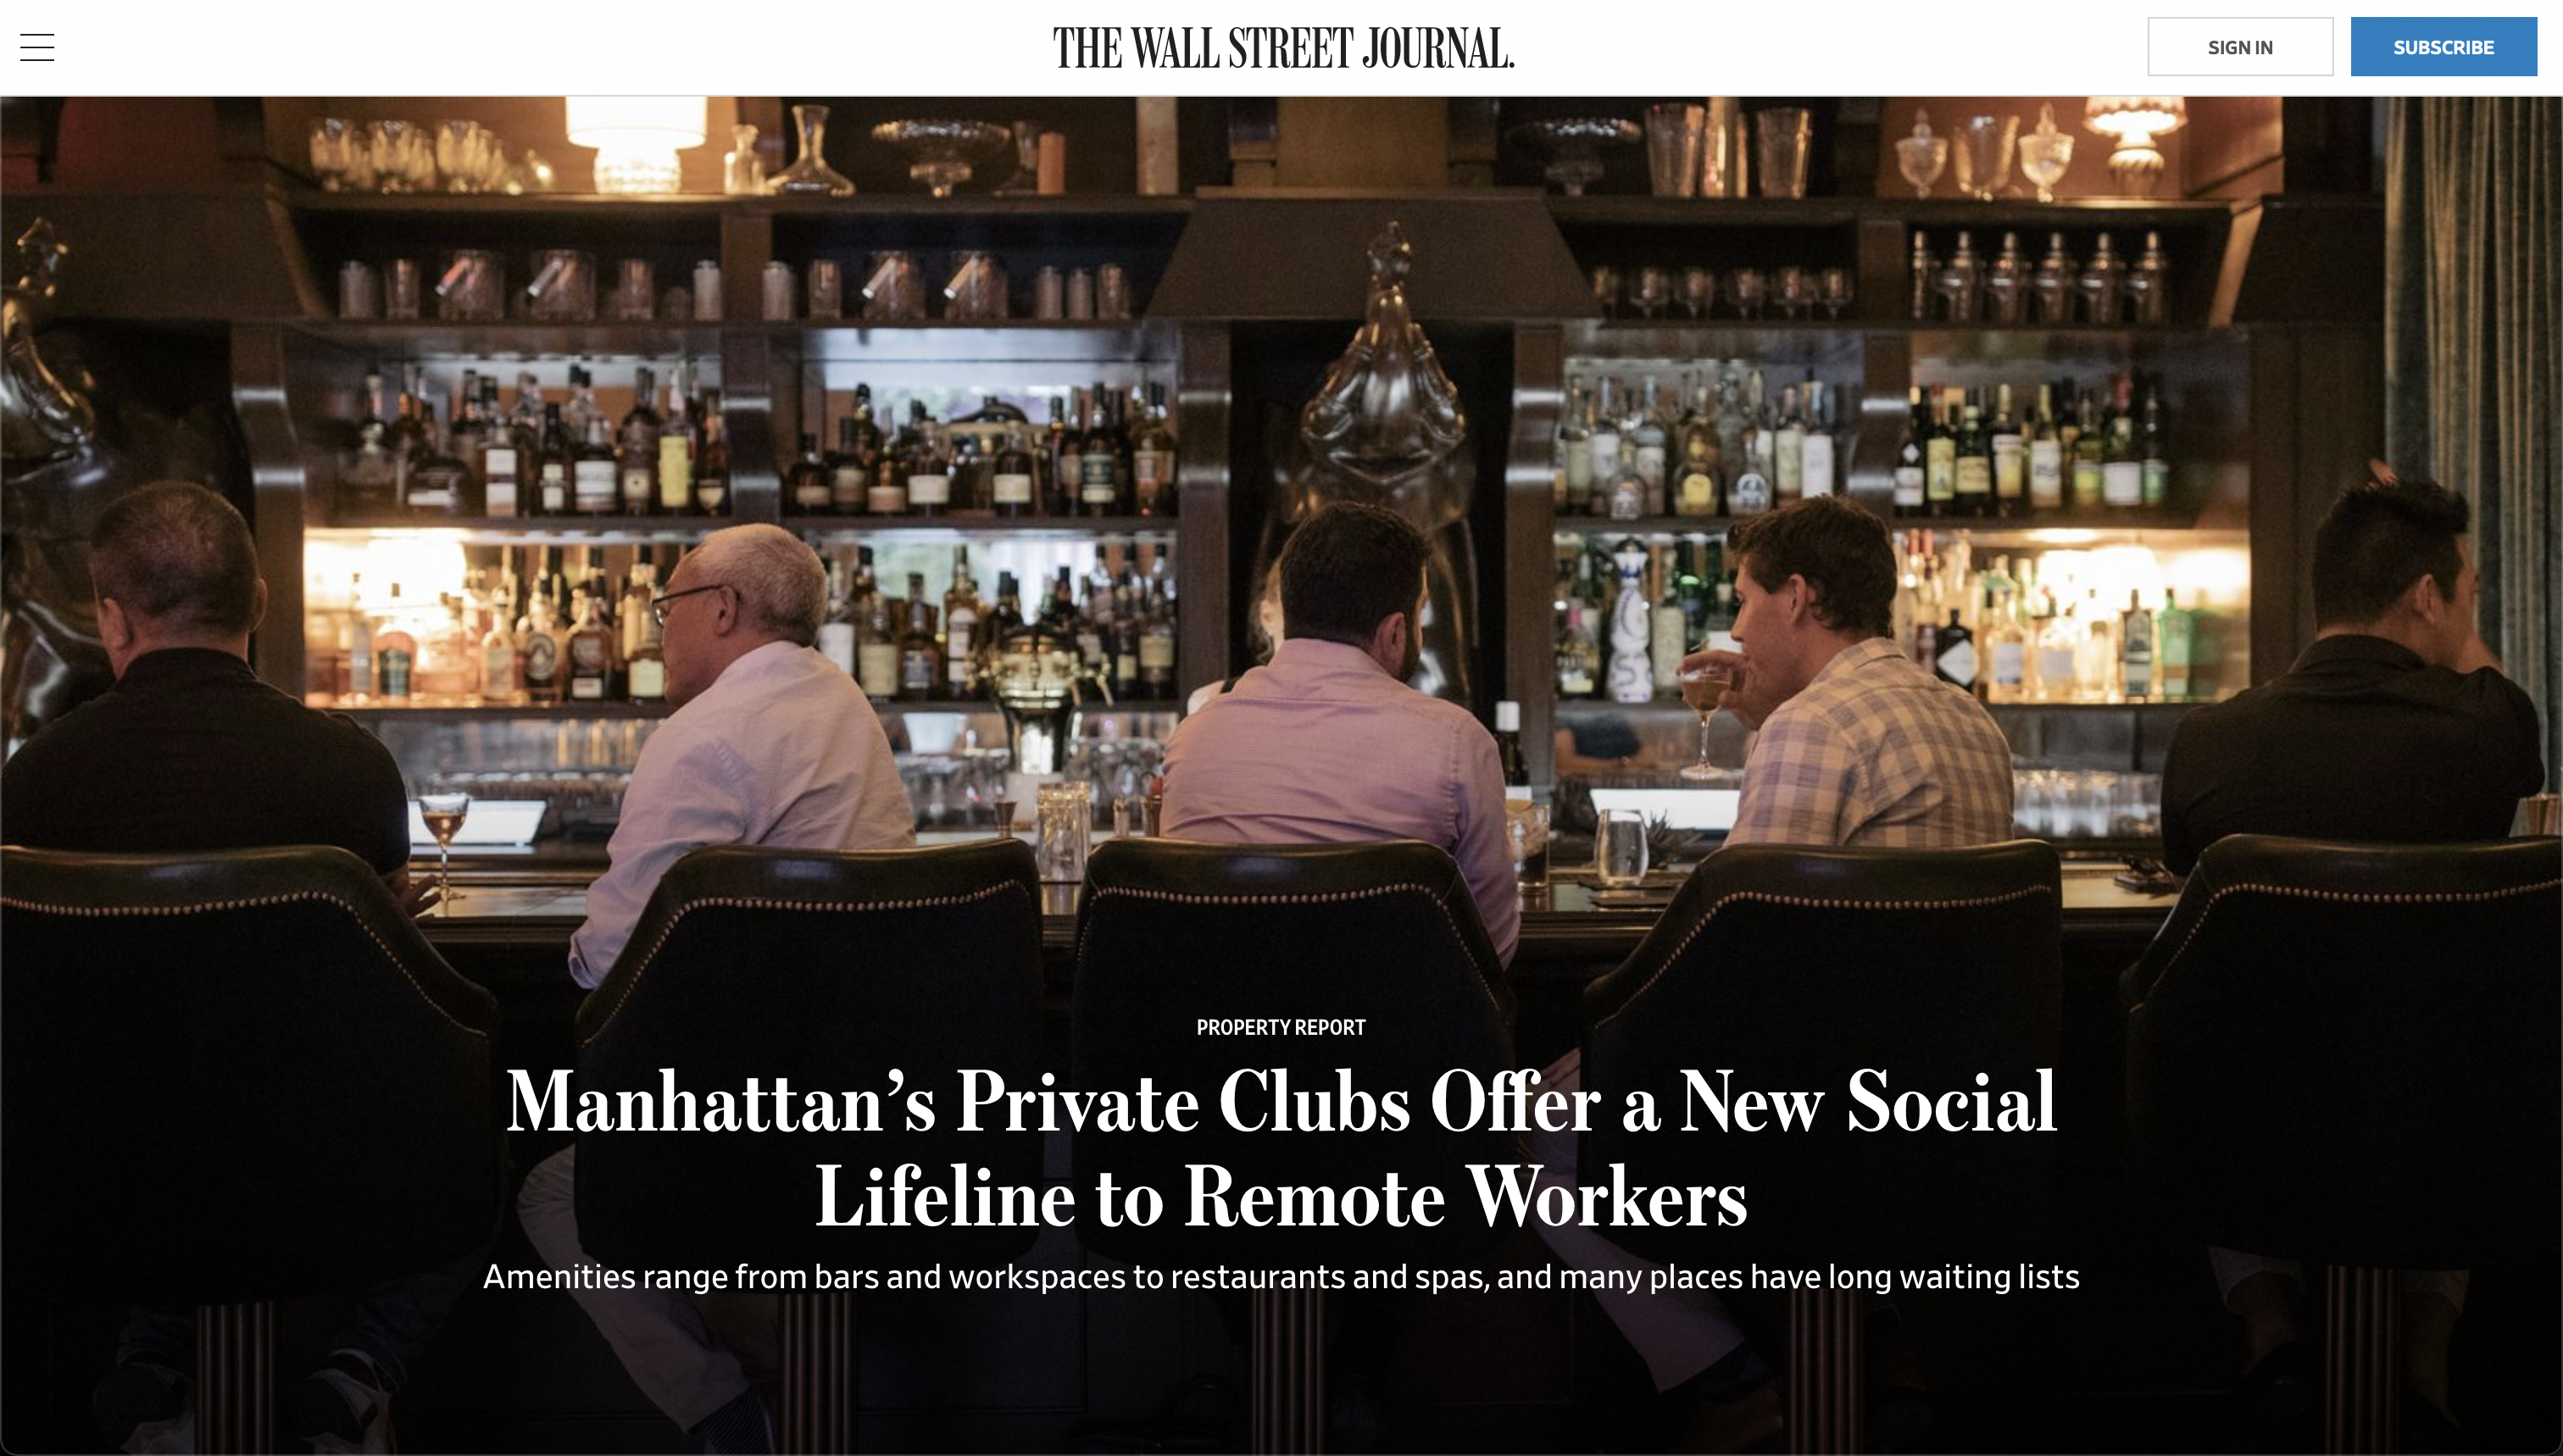 for The Wall Street Journal: Manhattan’s Private Clubs Offer a New Social Lifeline to Remote Workers 